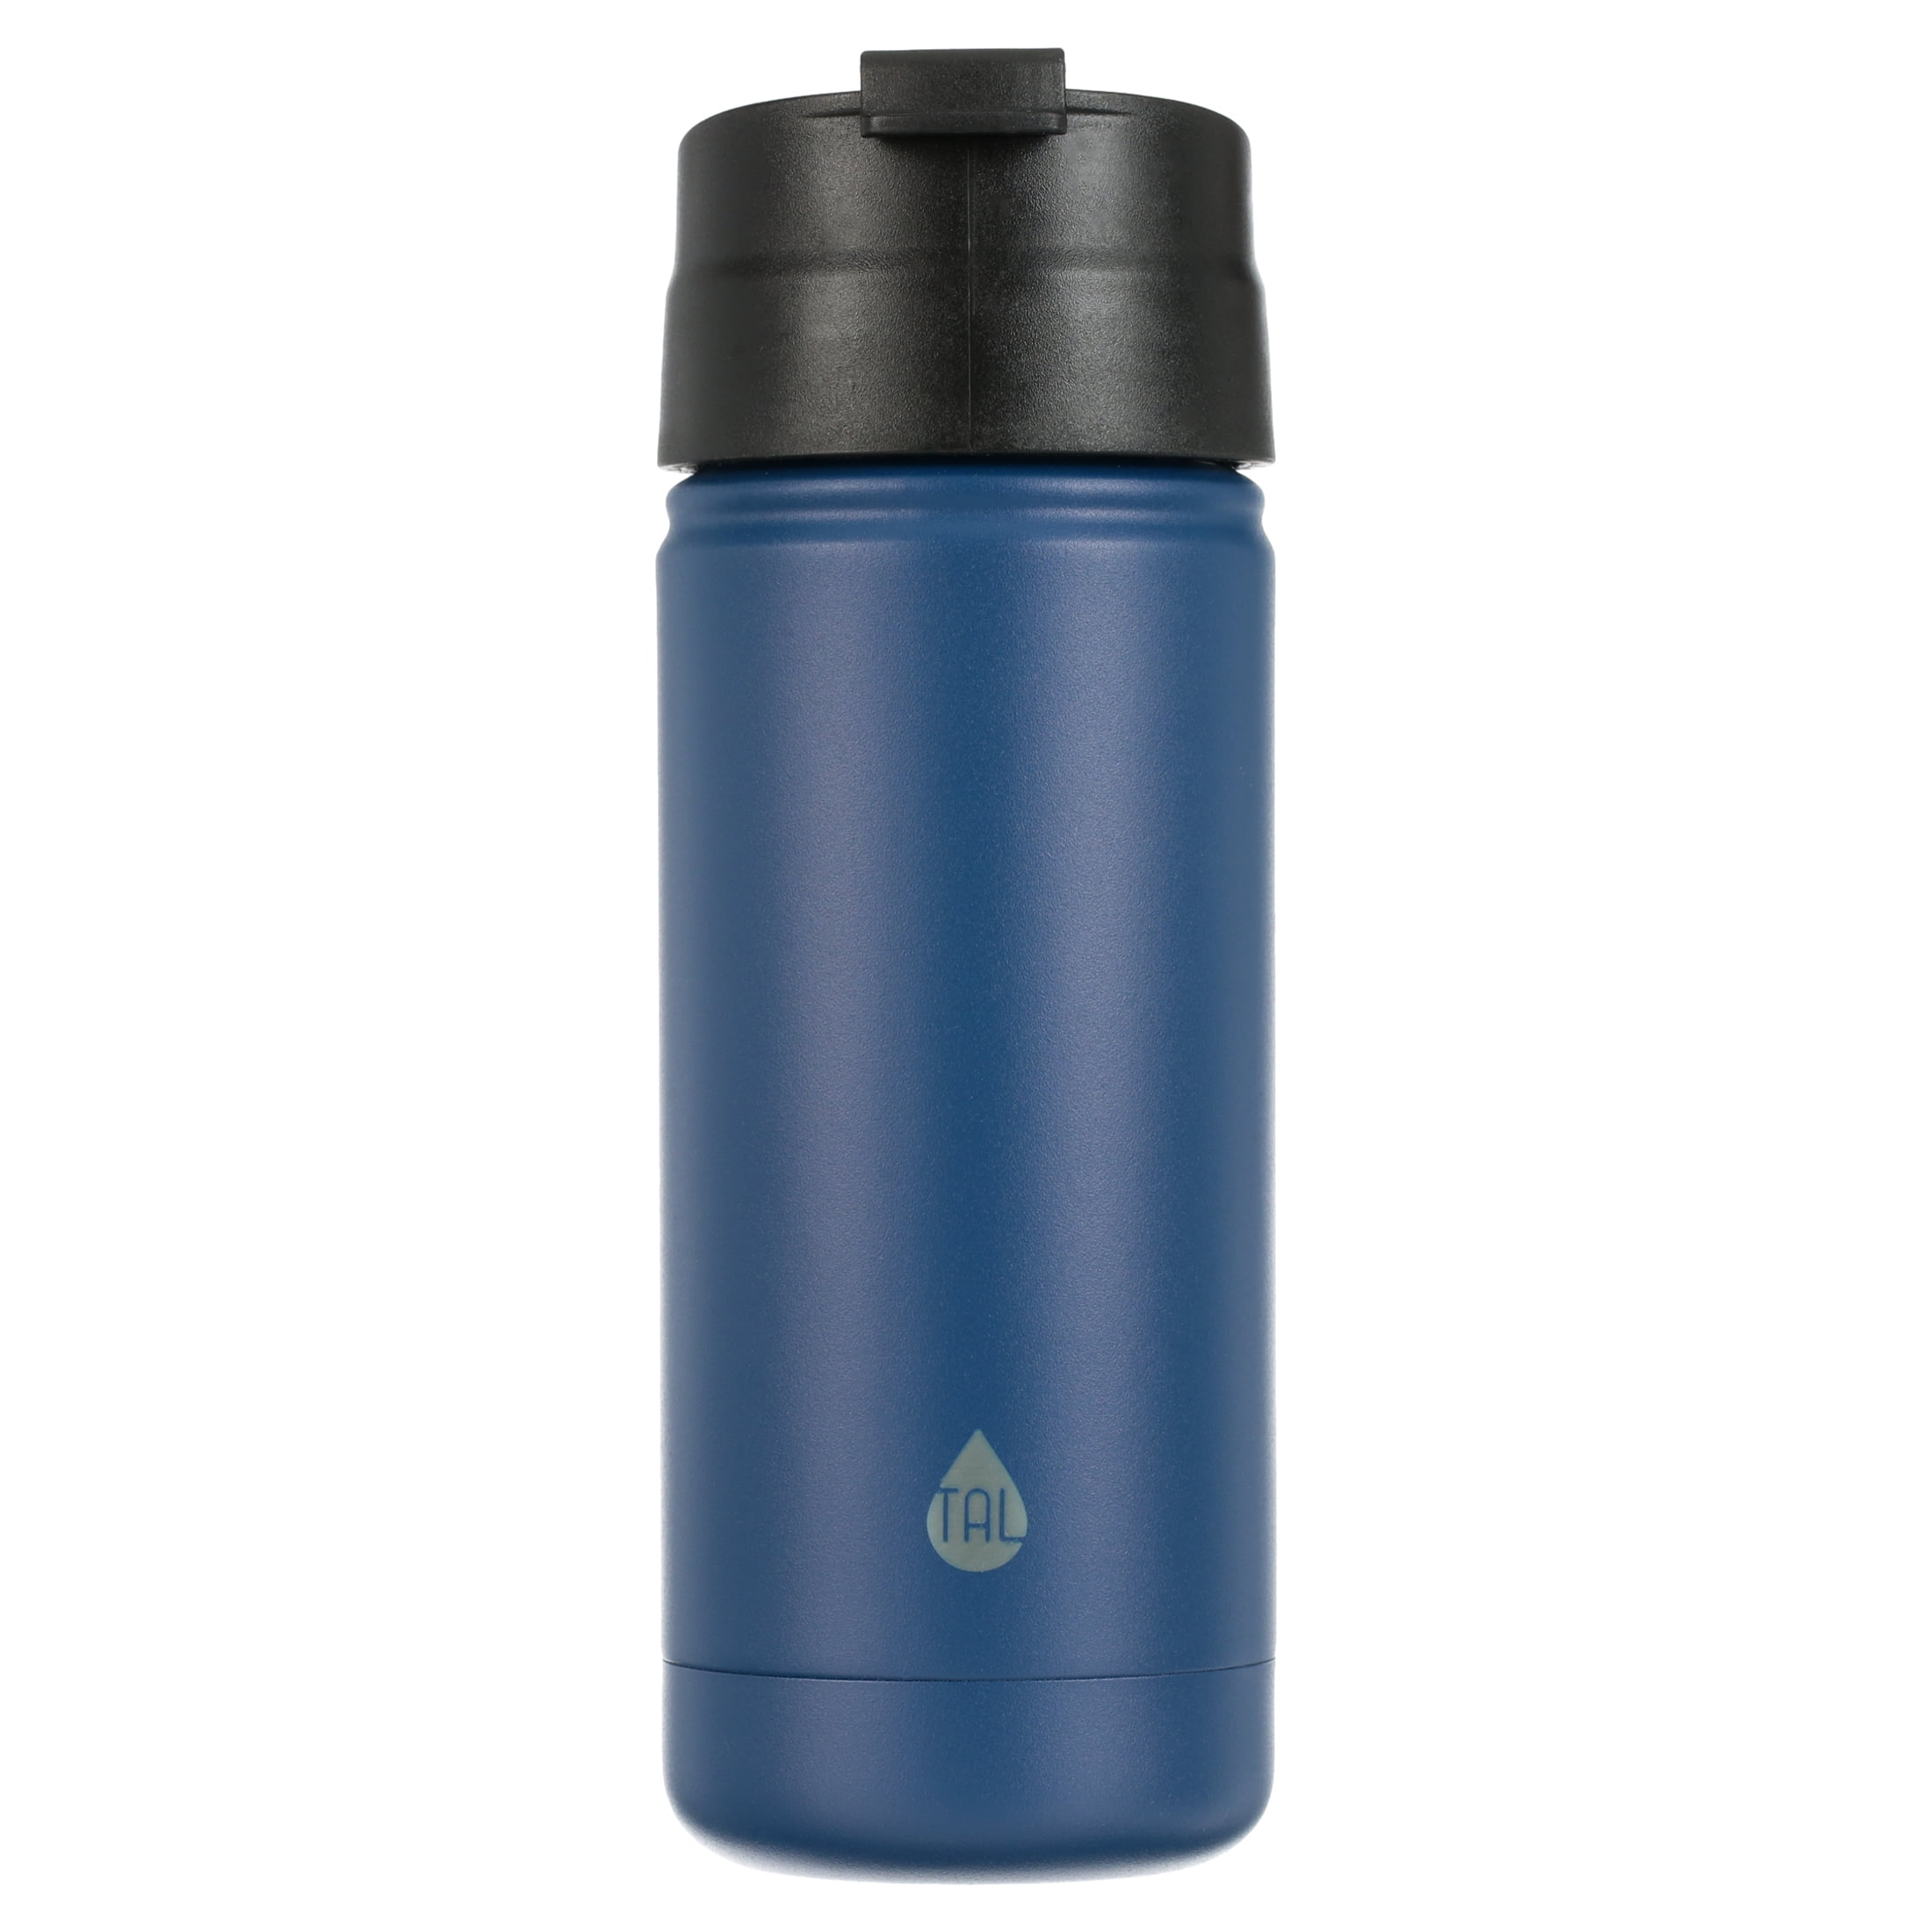 TAL Stainless Steel Tumblers At WALMART. 3 Different Colors. 3 Differ, Stainless Steel Water Bottle